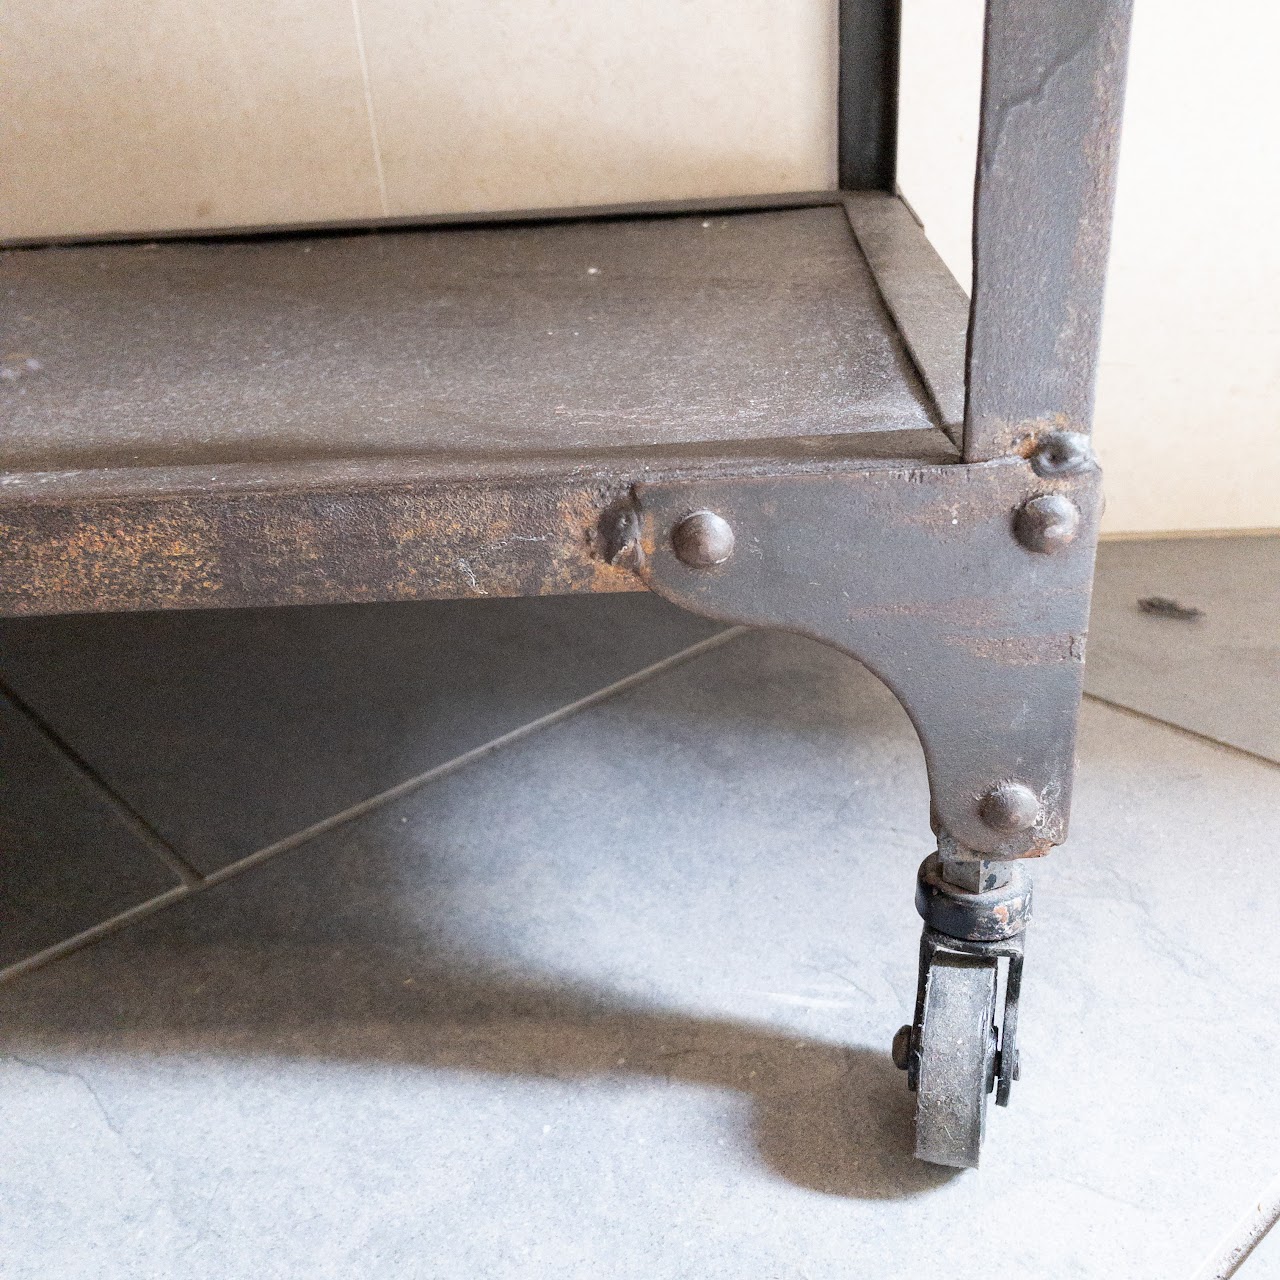 Industrial Style Console Table